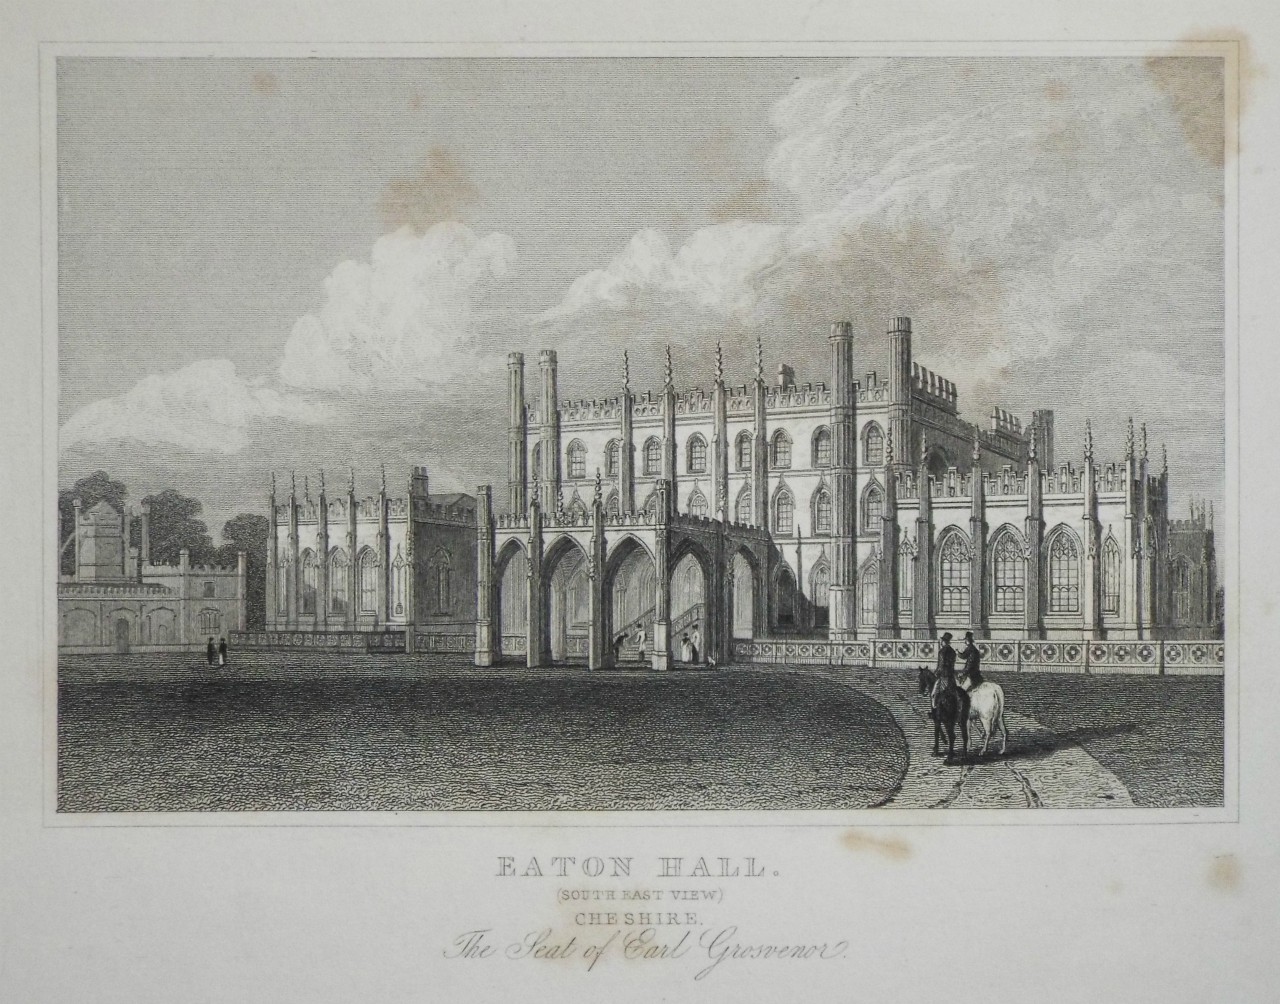 Print - Eaton Hall, (South East View) Cheshire. The Seat of Earl Grosvenor. - Radclyffe